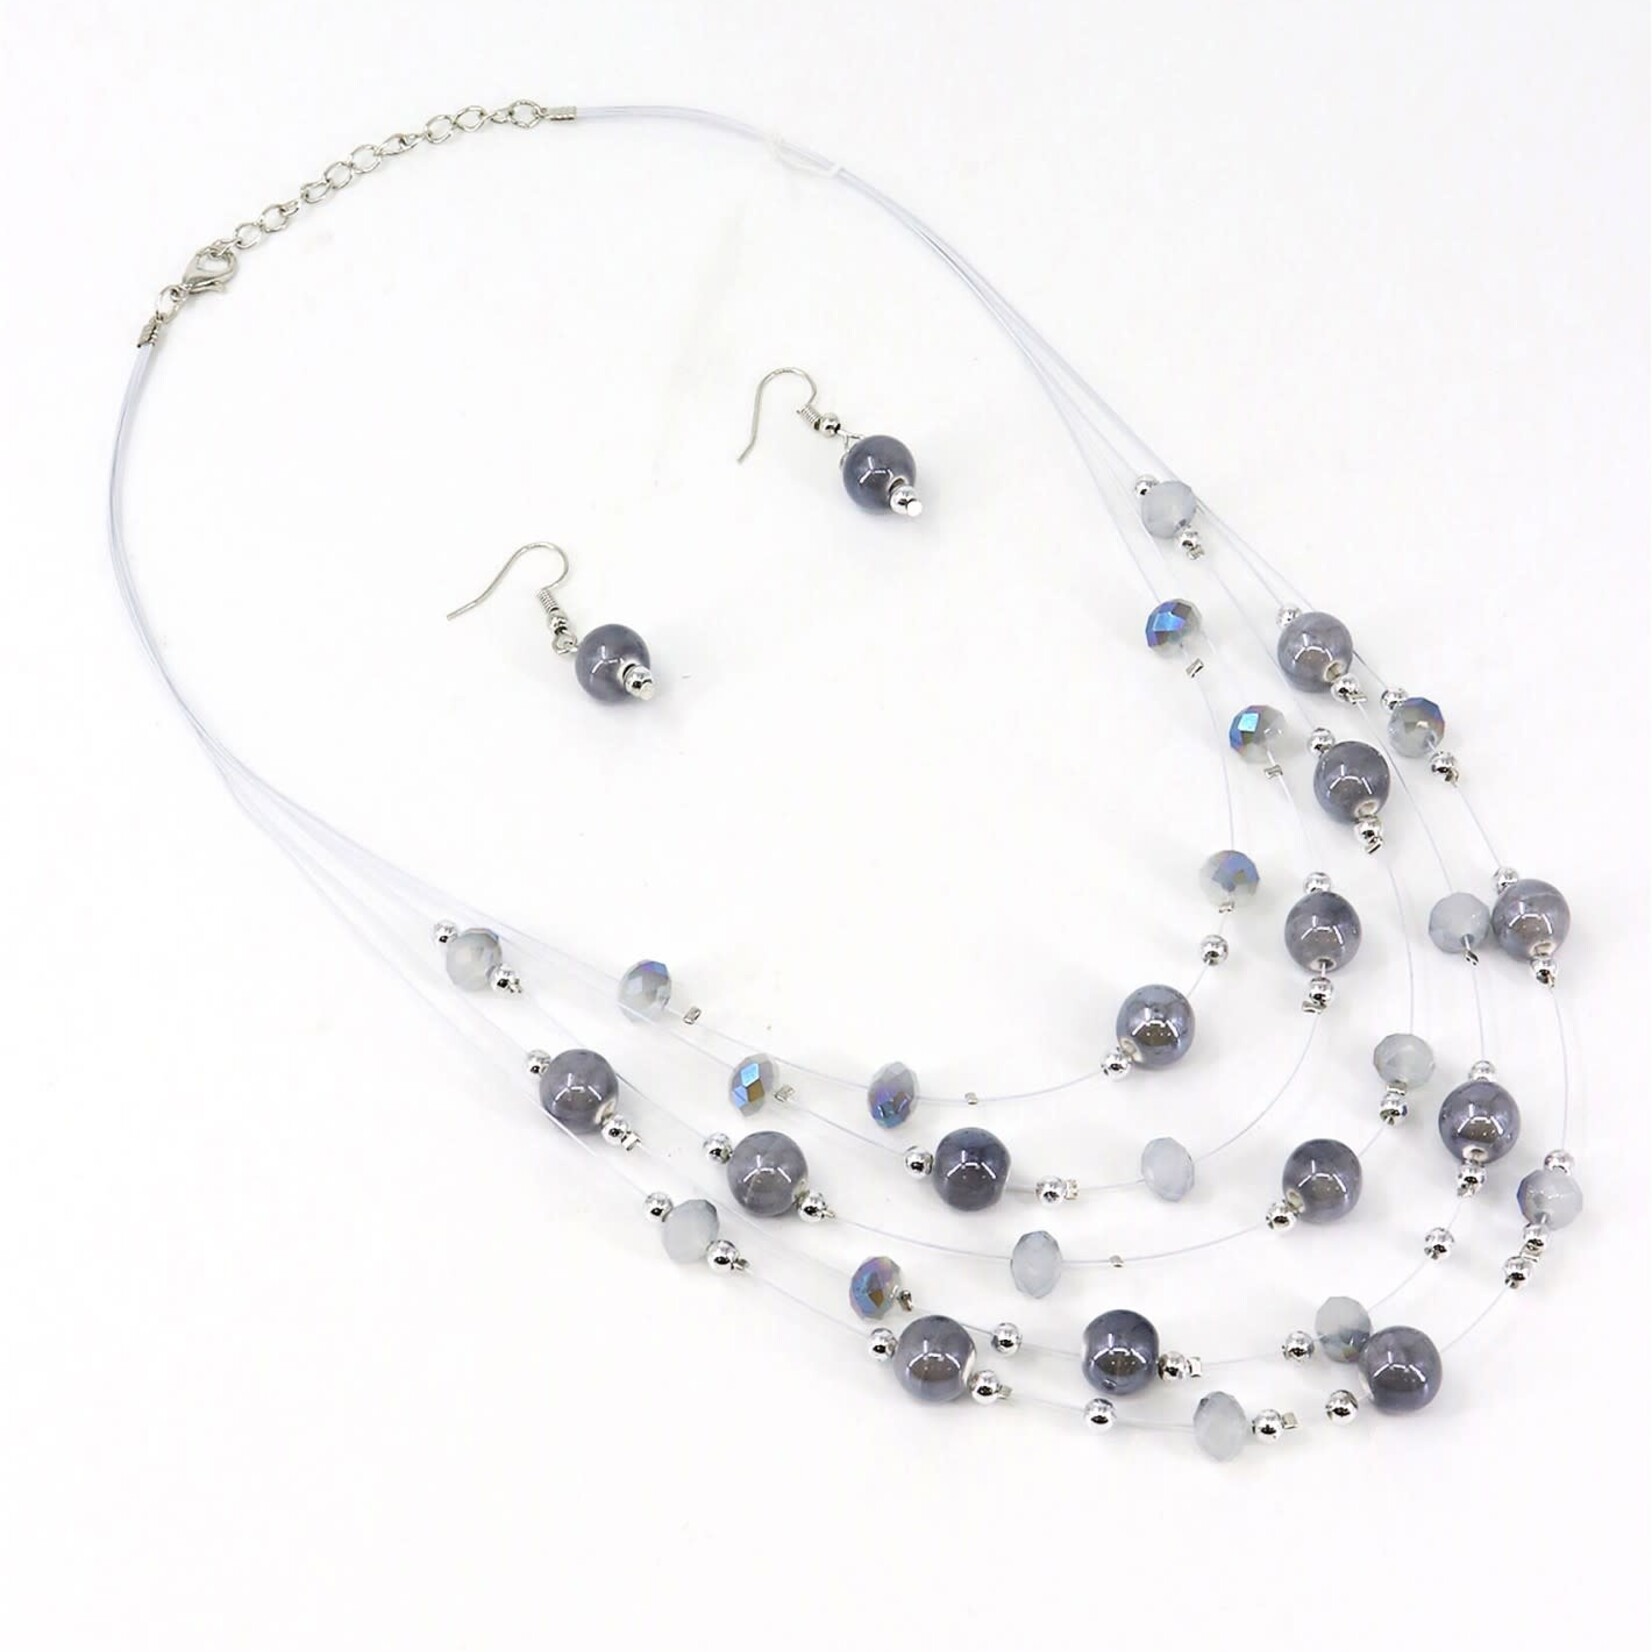 Round Beads Necklace and Earrings Set-Grey